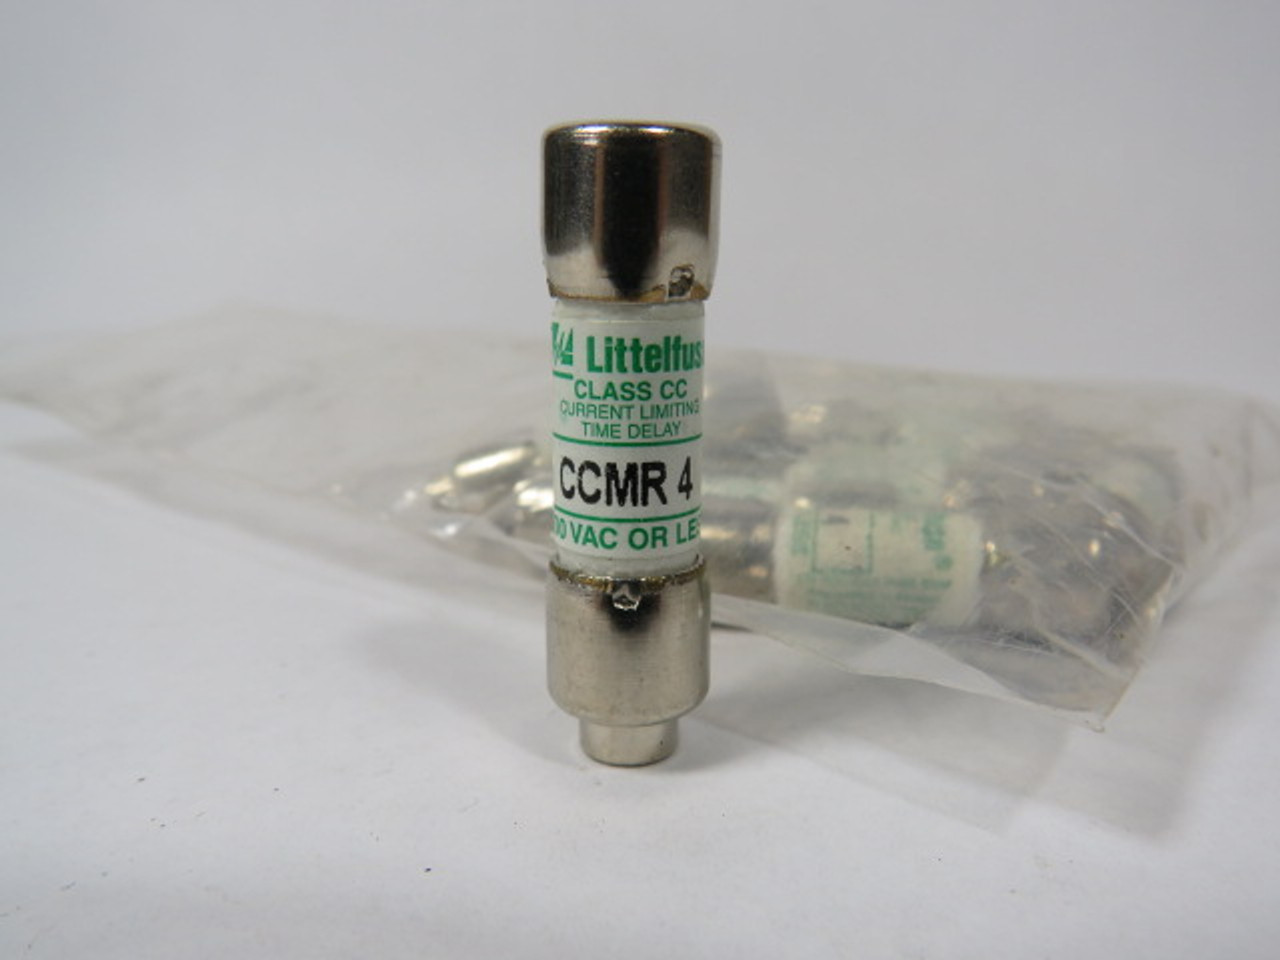 Littelfuse CCMR-4 Current Limiting Time Delay Fuse 4A 600V Lot of 10 USED